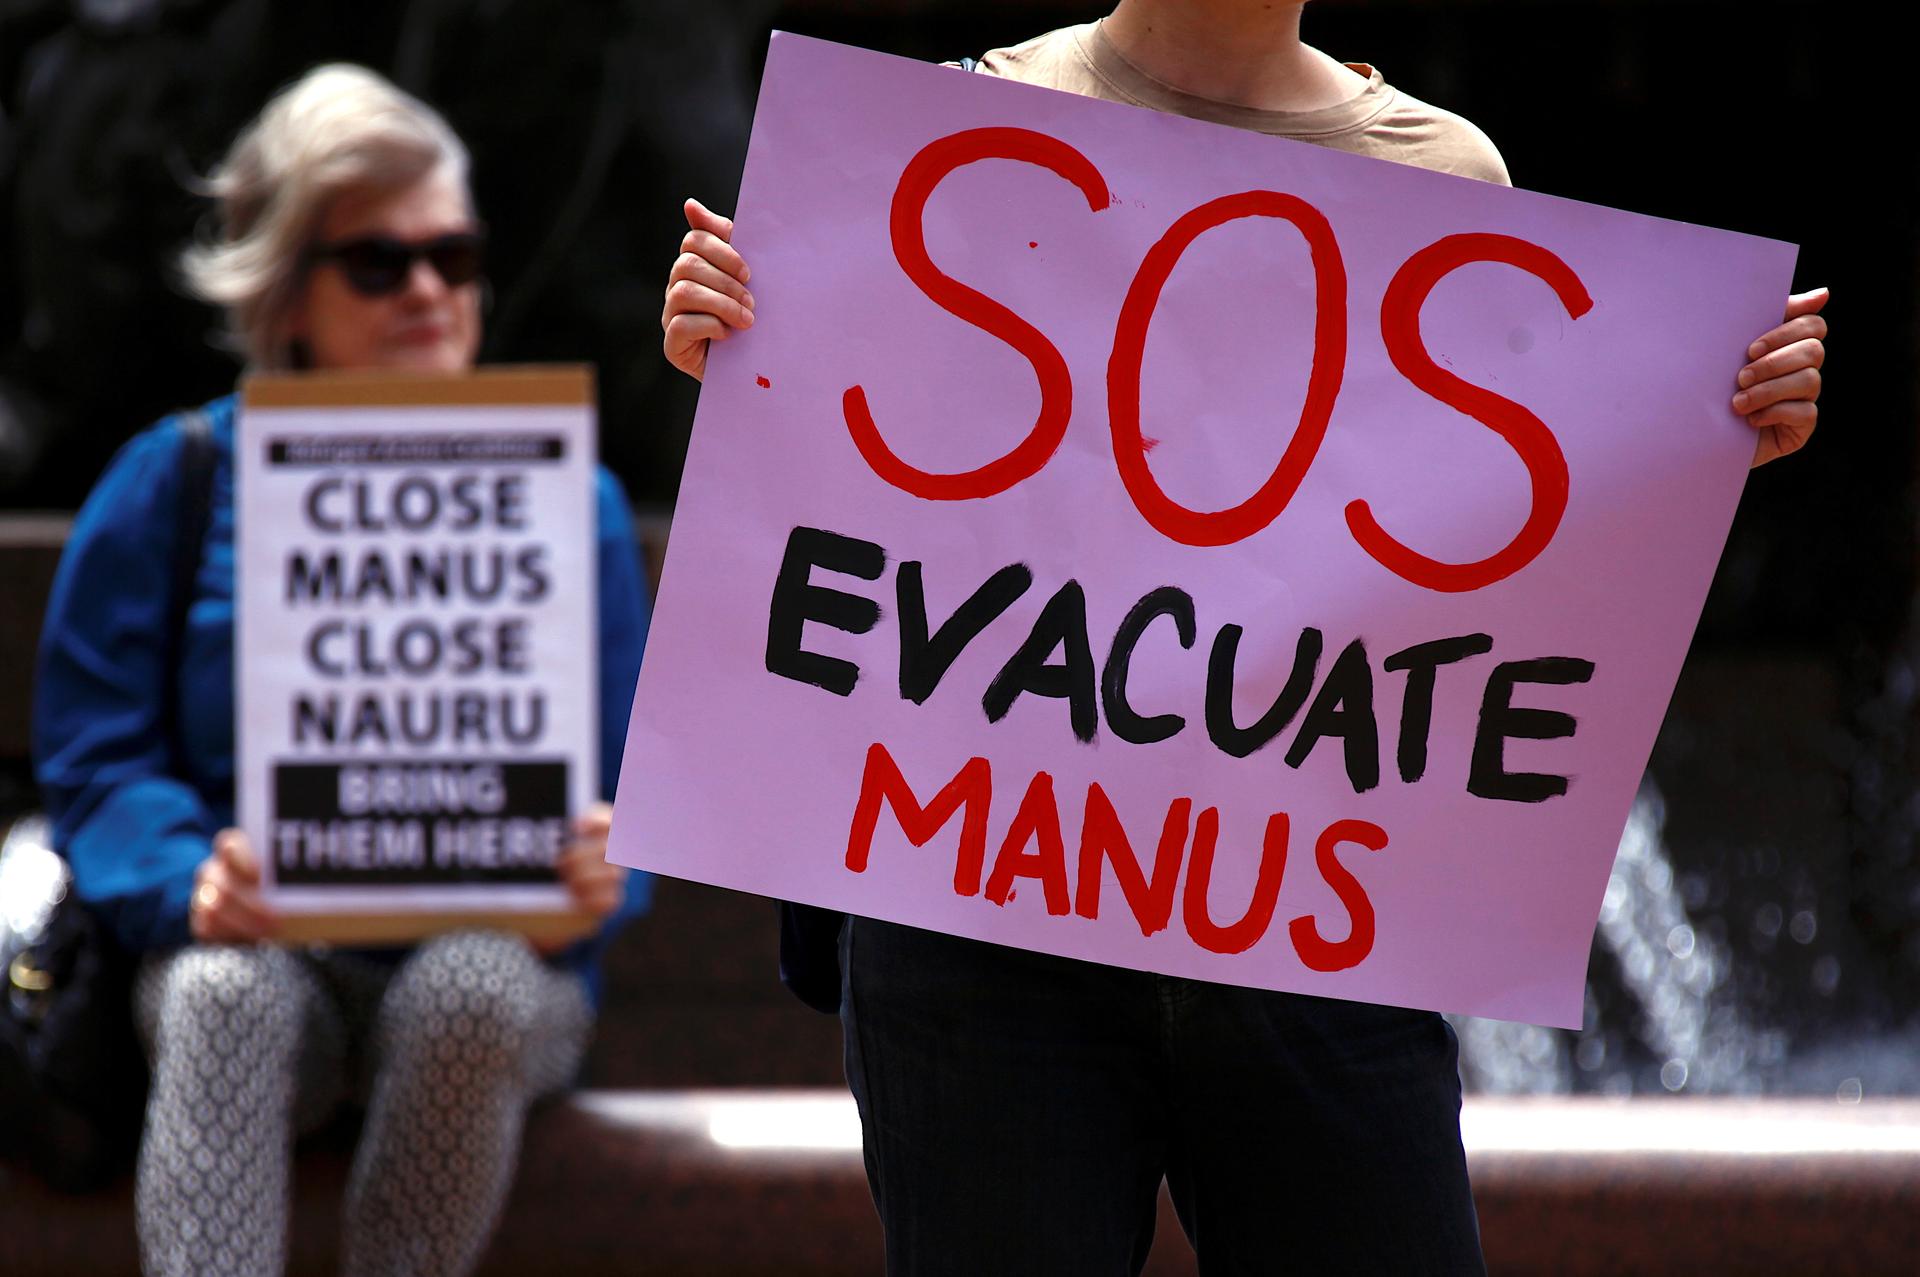 A pink sign reading "SOS EVACUATE MANUS" is held up by a protester.